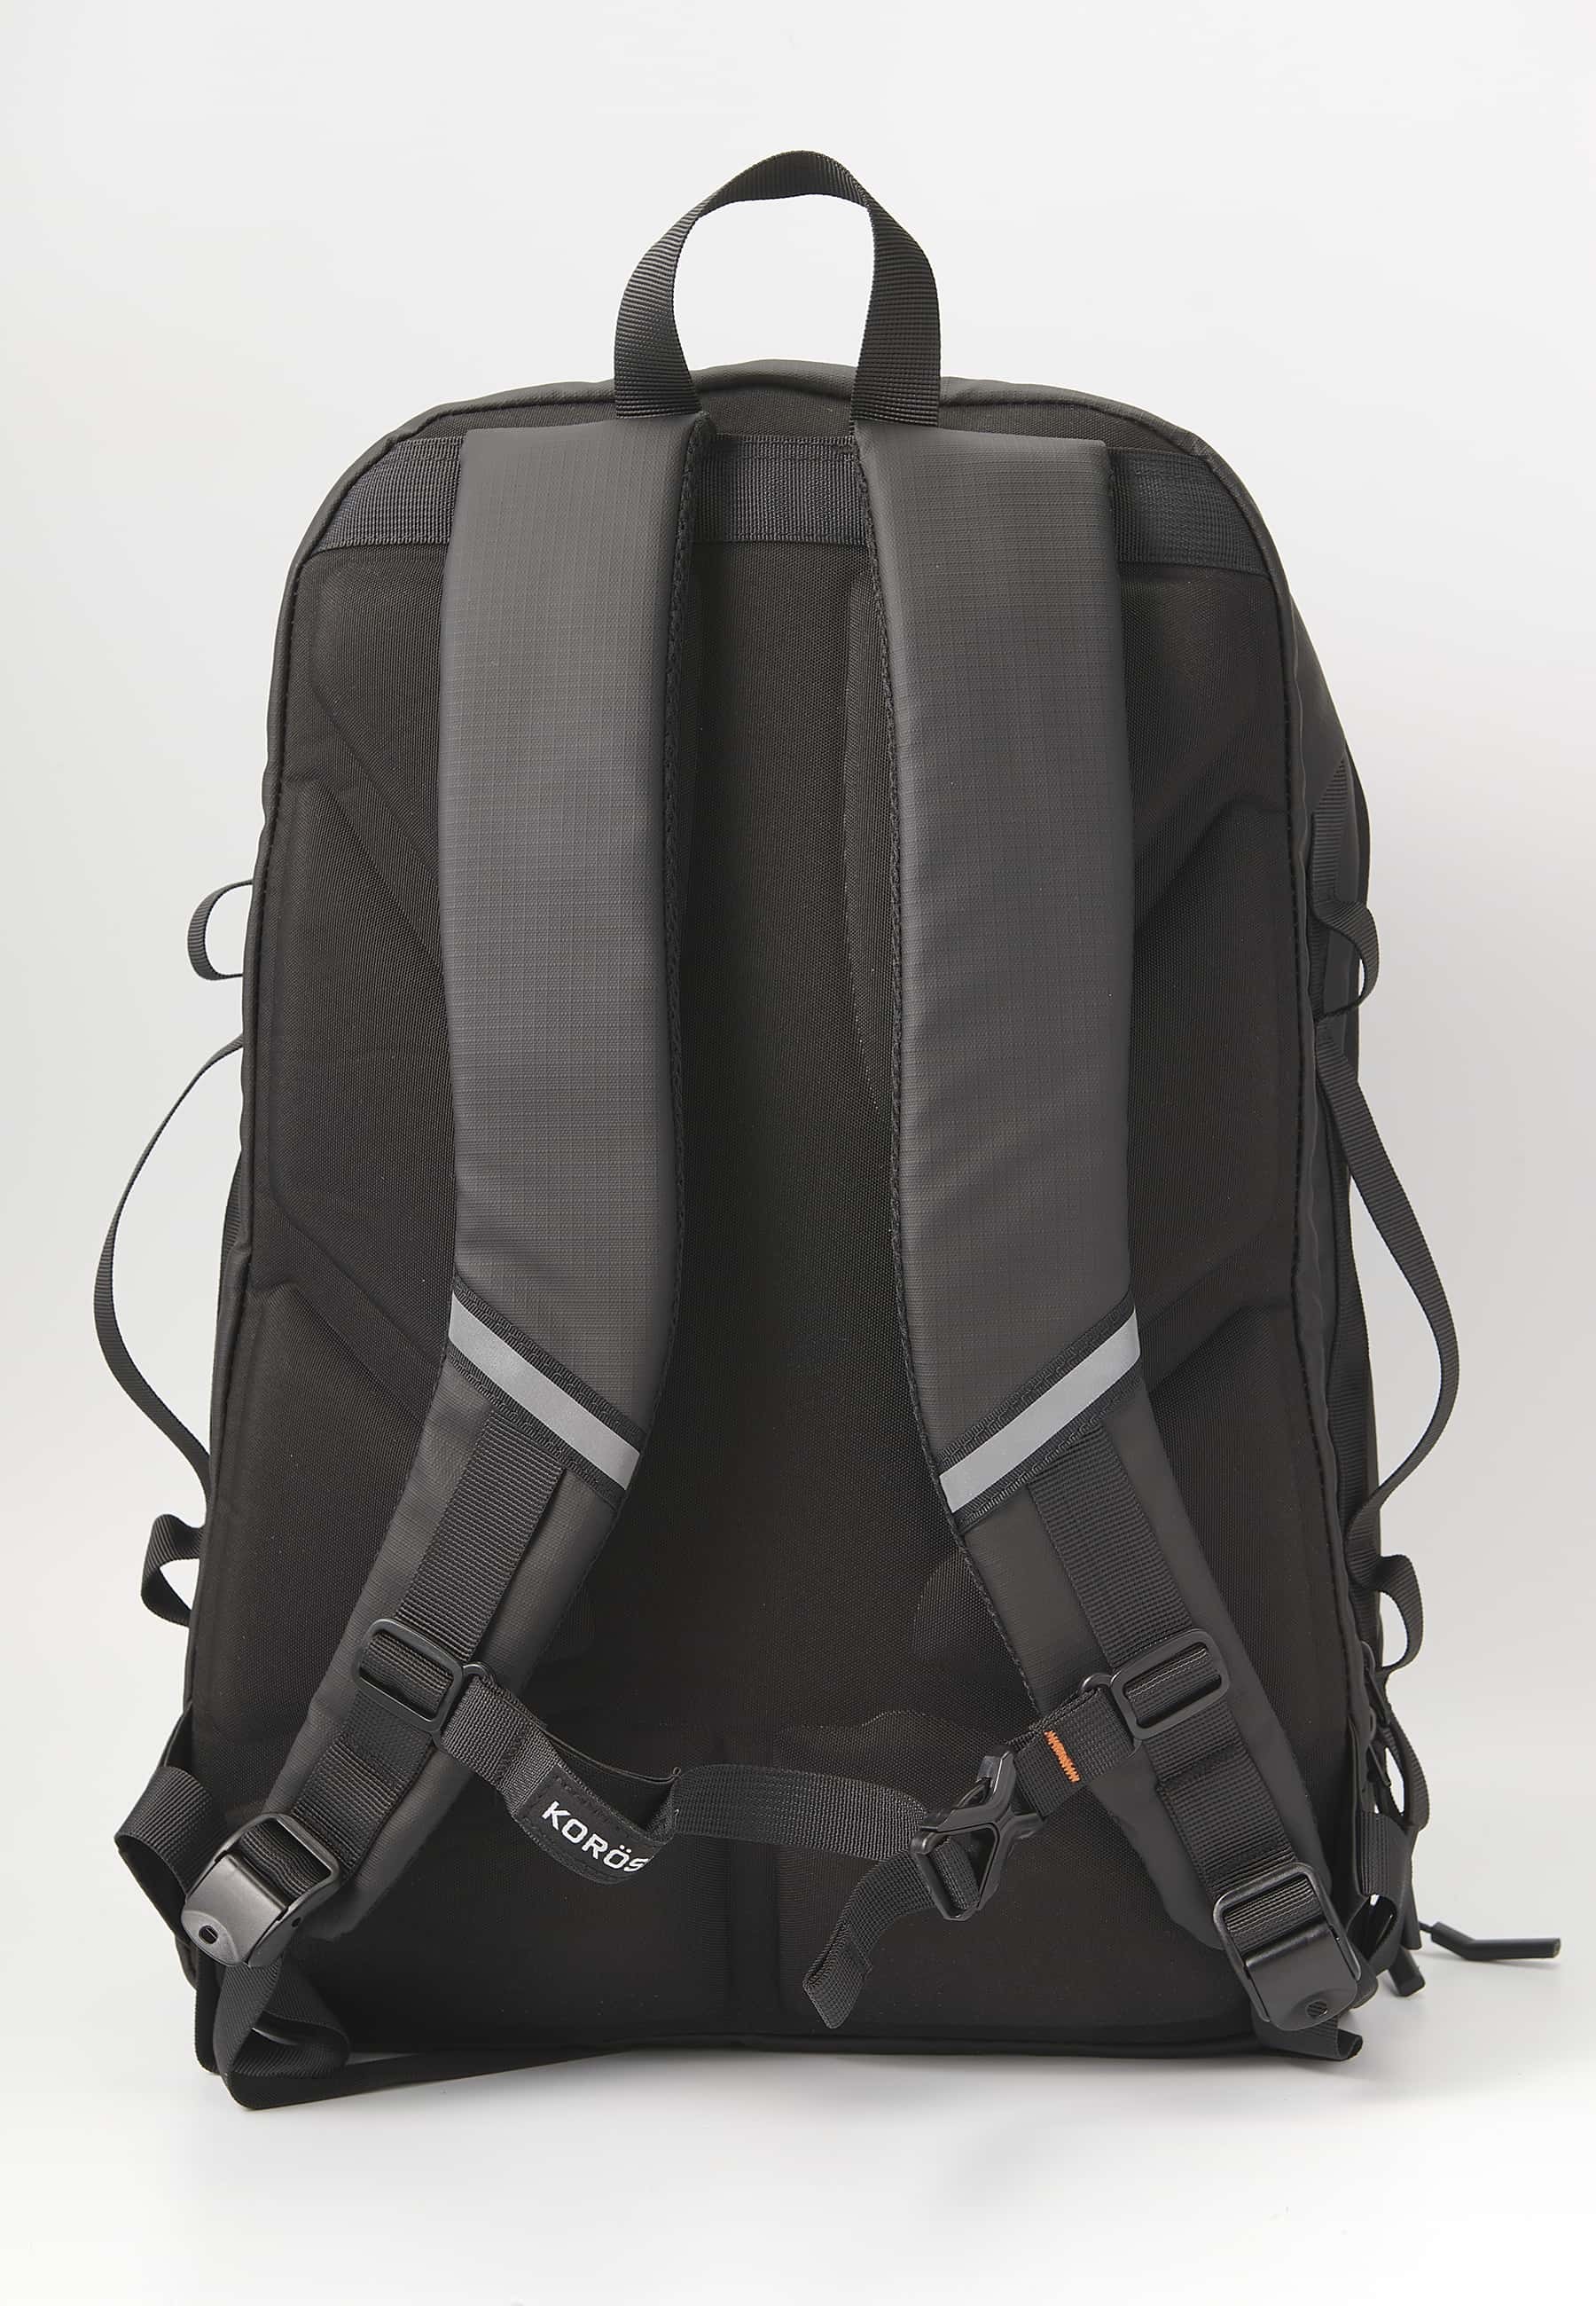 Koröshi backpack with two zippered compartments, one for a laptop and adjustable straps in Black